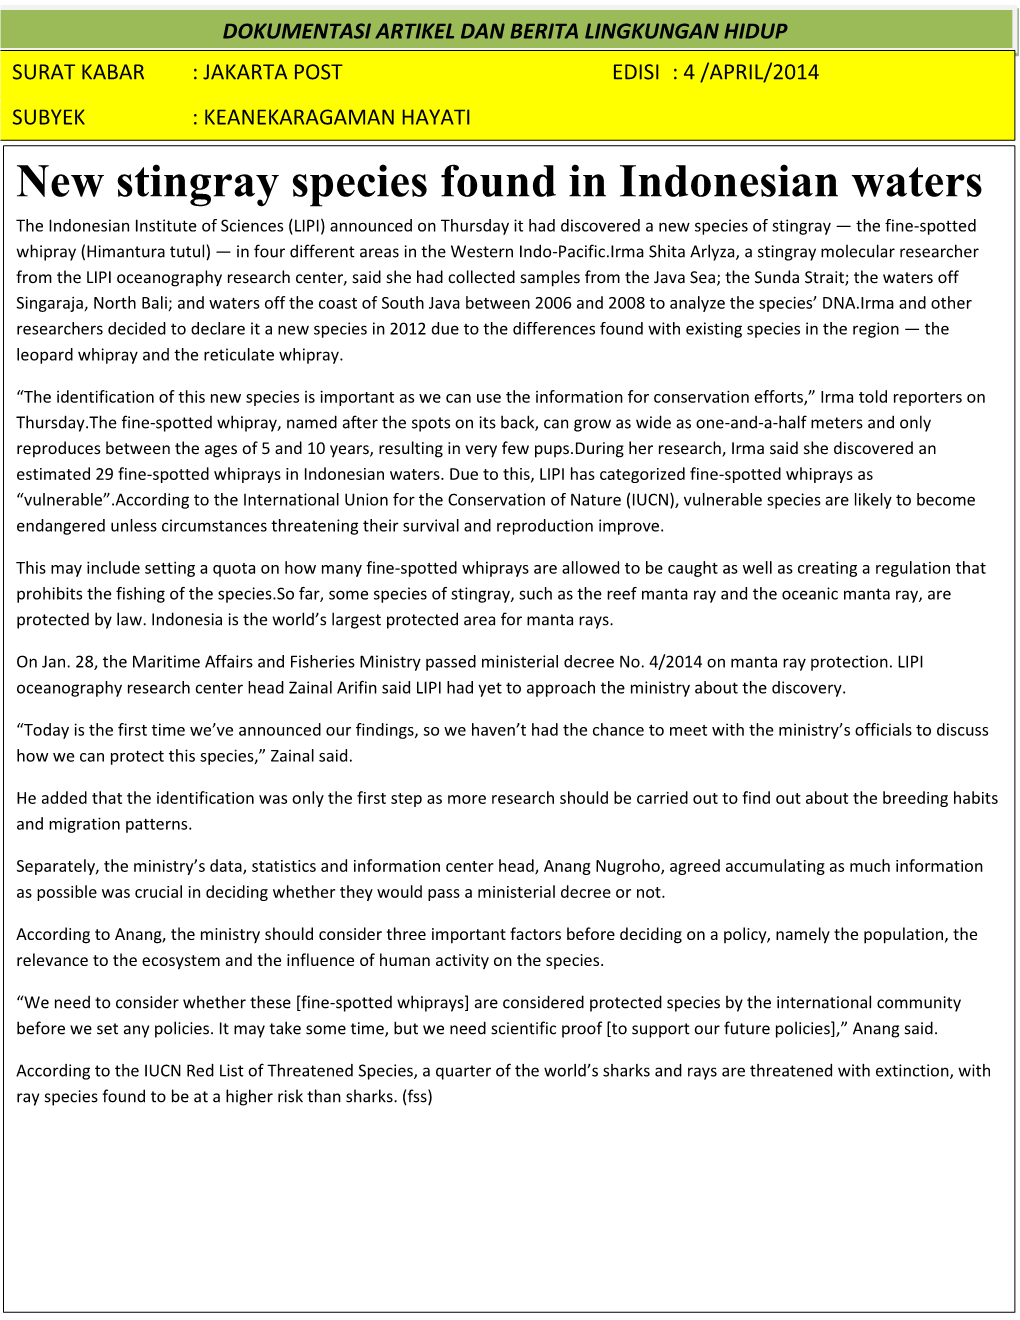 New Stingray Species Found in Indonesian Waters